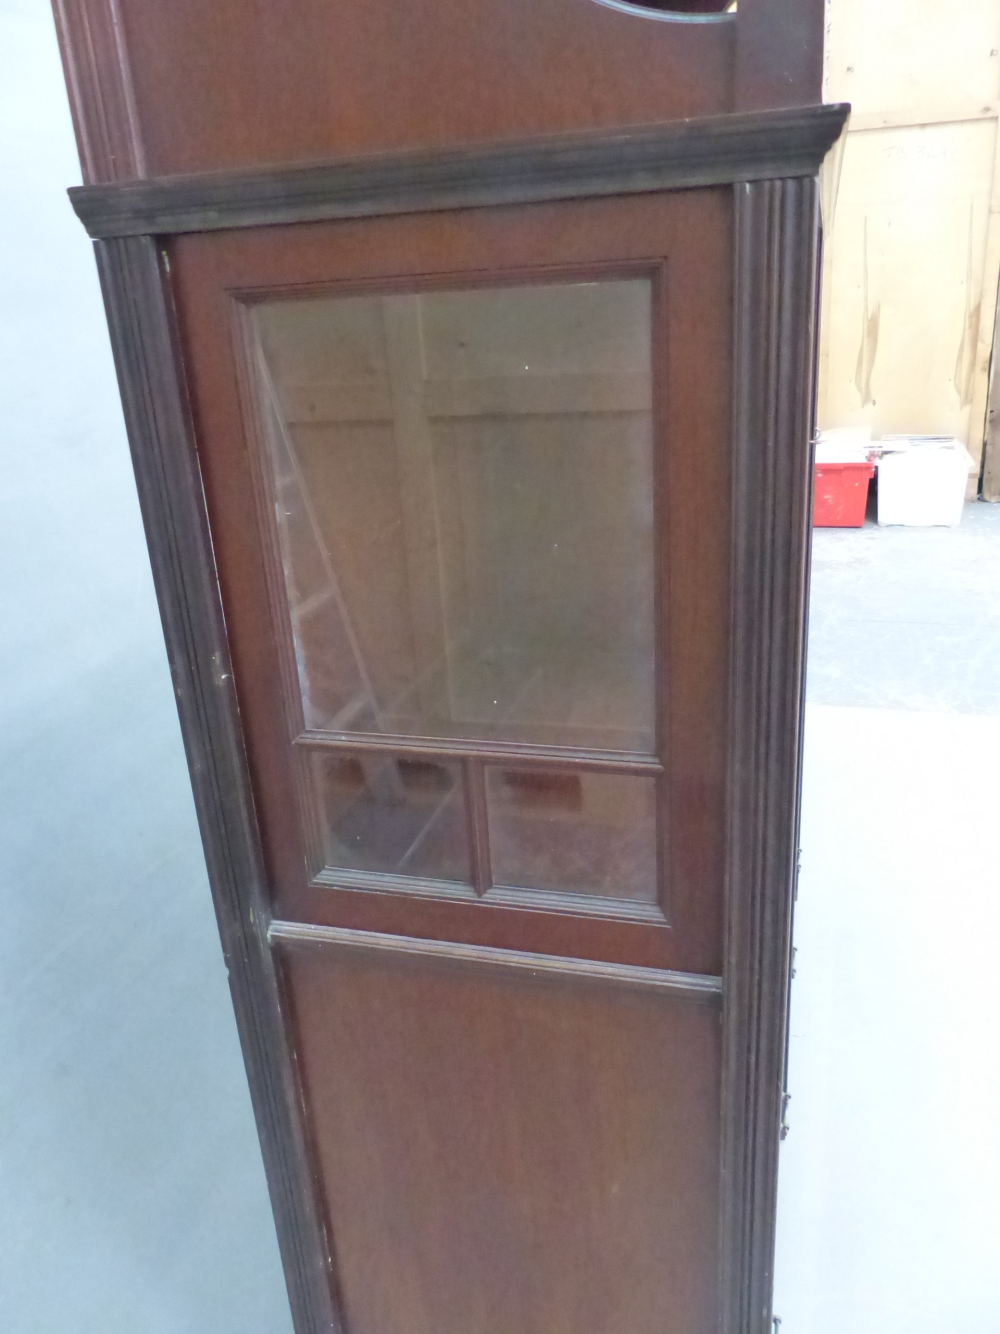 AN ARTS AND CRAFTS MORRIS STYLE MAHOGANY DISPLAY CABINET, THE TOP SHELF WITH BEVELLED GLASS MIRROR - Image 5 of 12